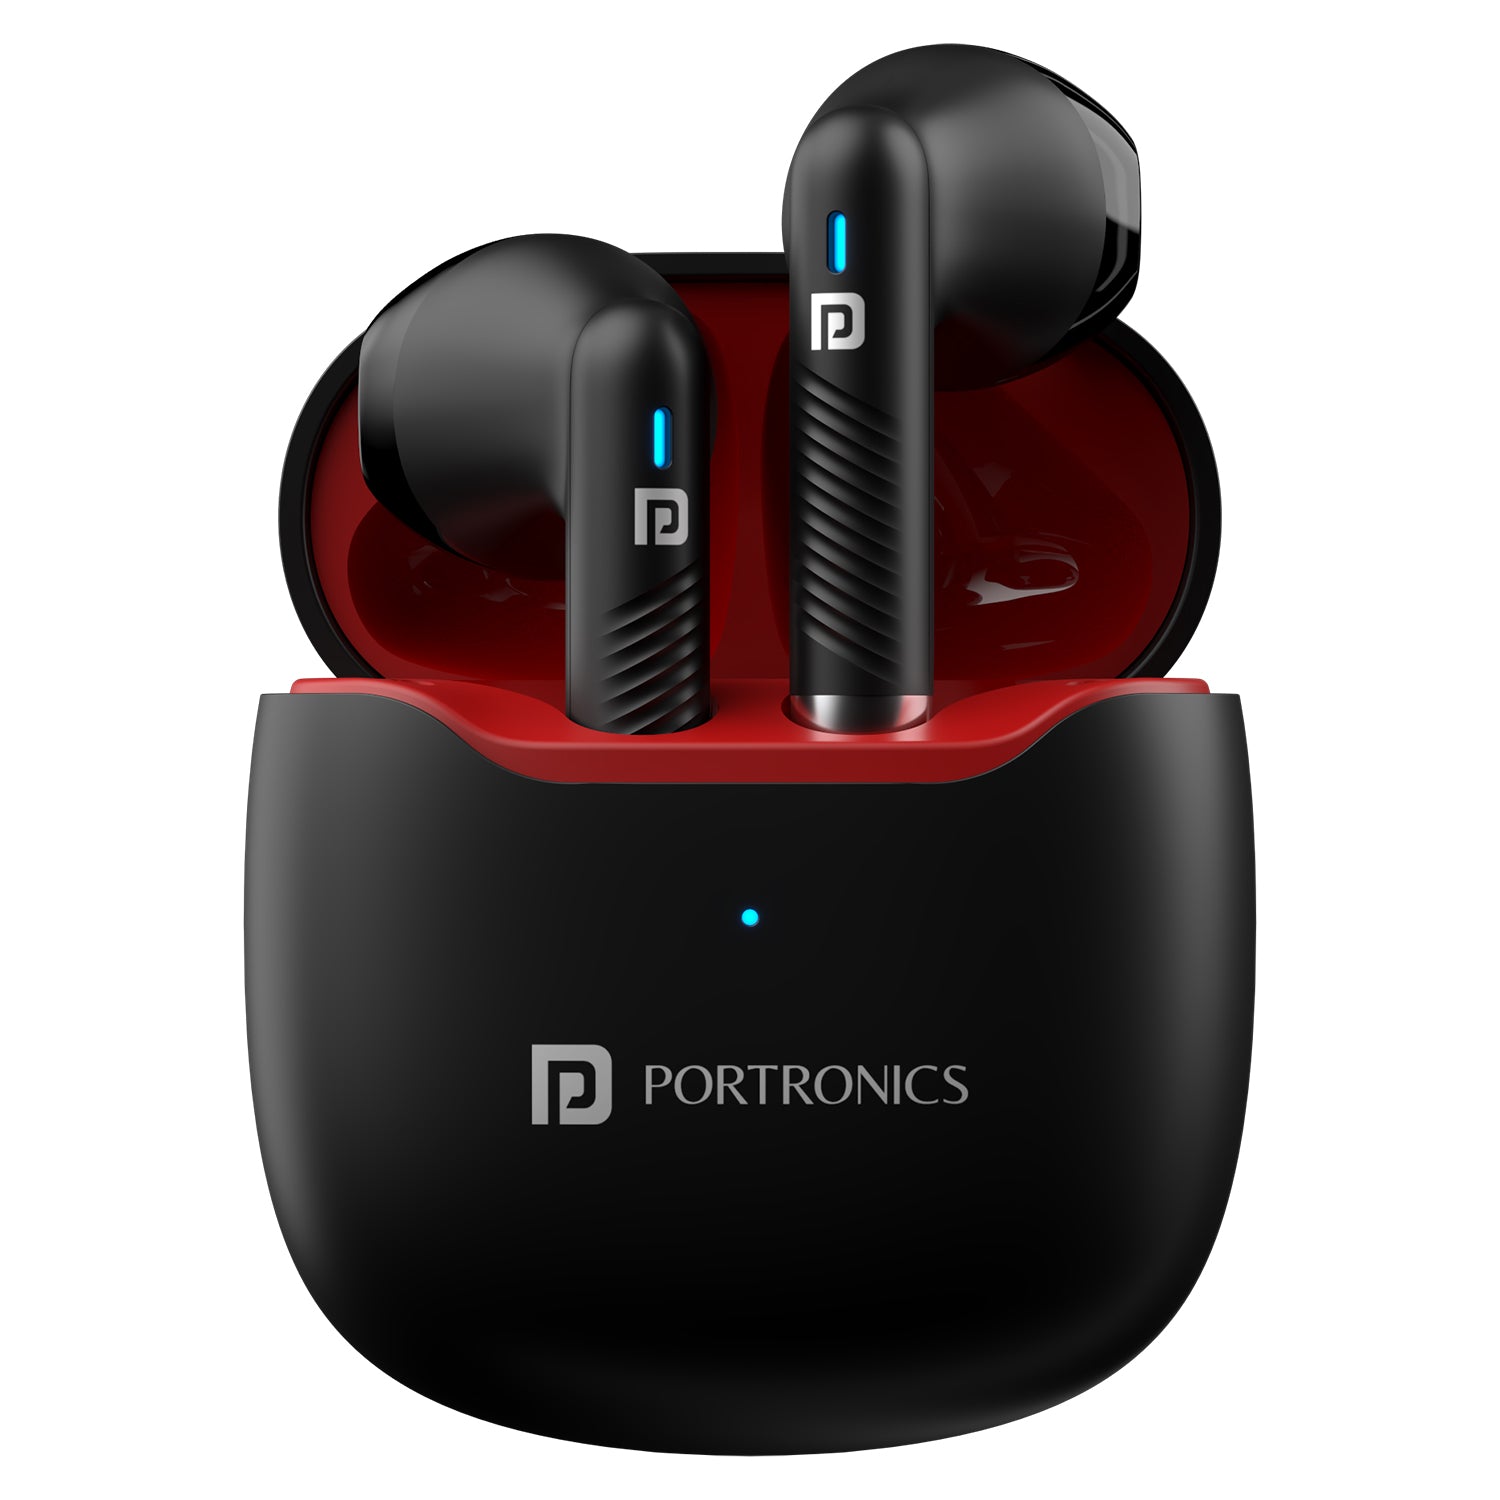 Portronics Harmonics Twins s12 Smart wireless TWS earbuds| Bluetooth earbuds with mic| best earbuds| latest earbuds under 1500 India